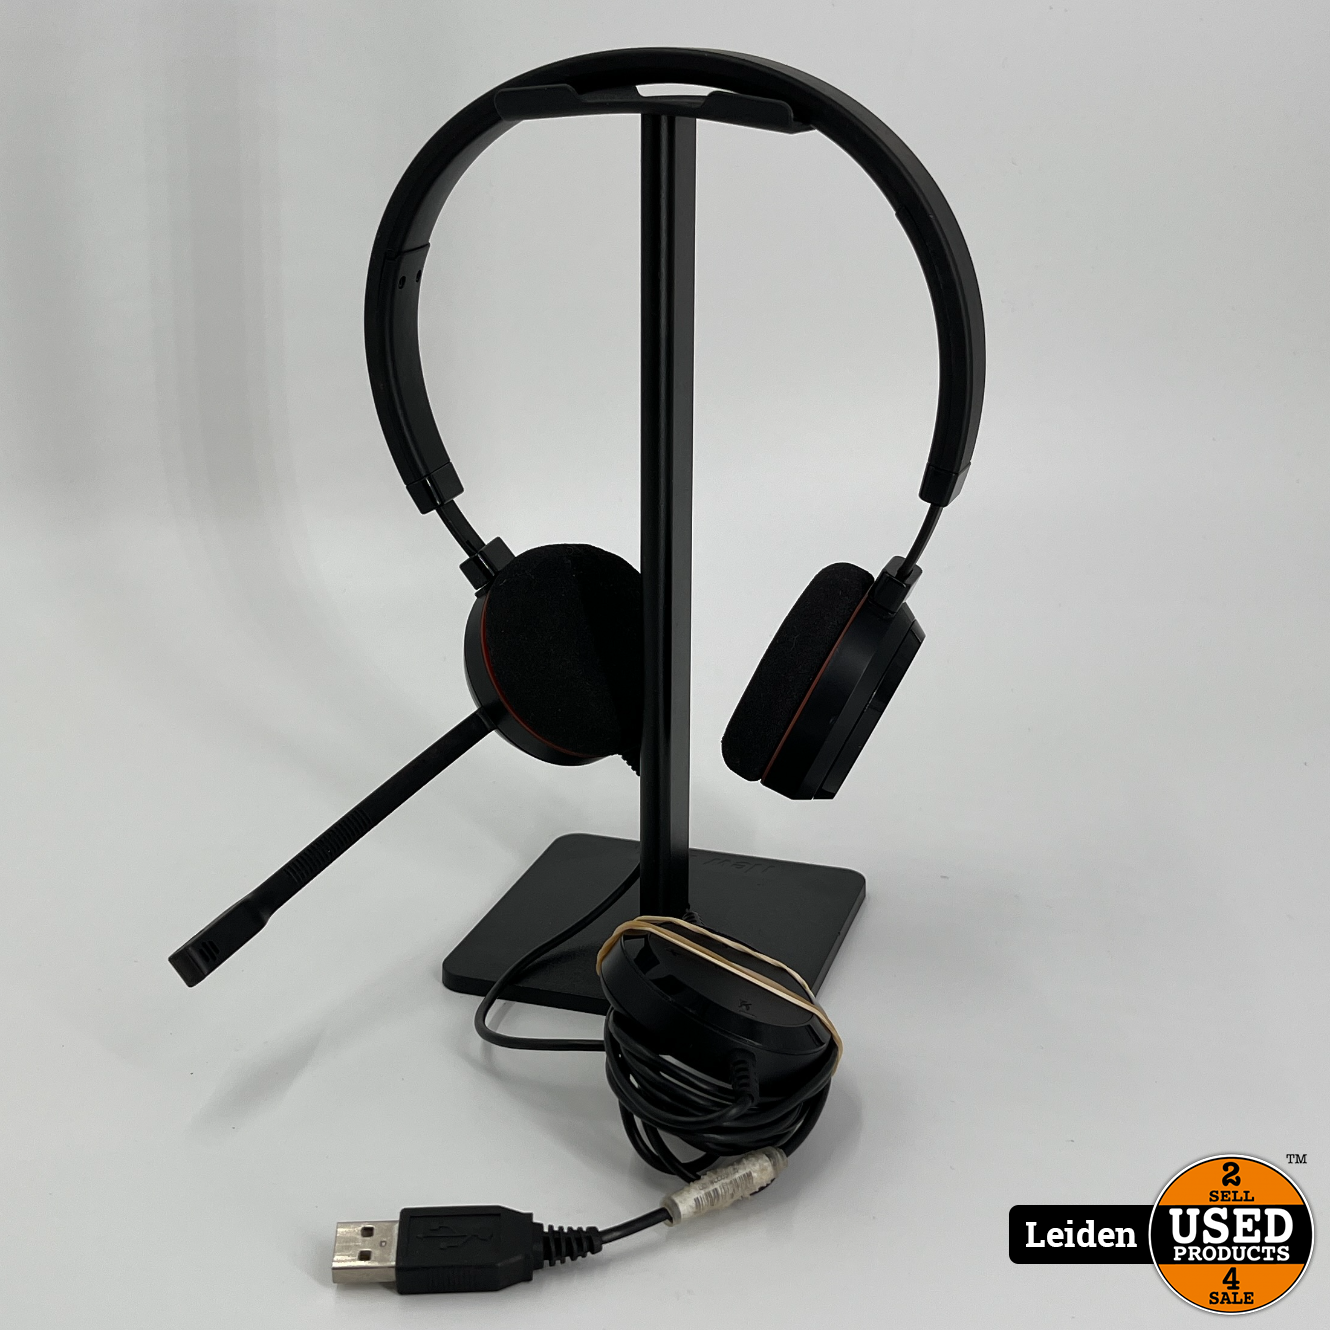 Evolve UC Headset - Used Products Leiden